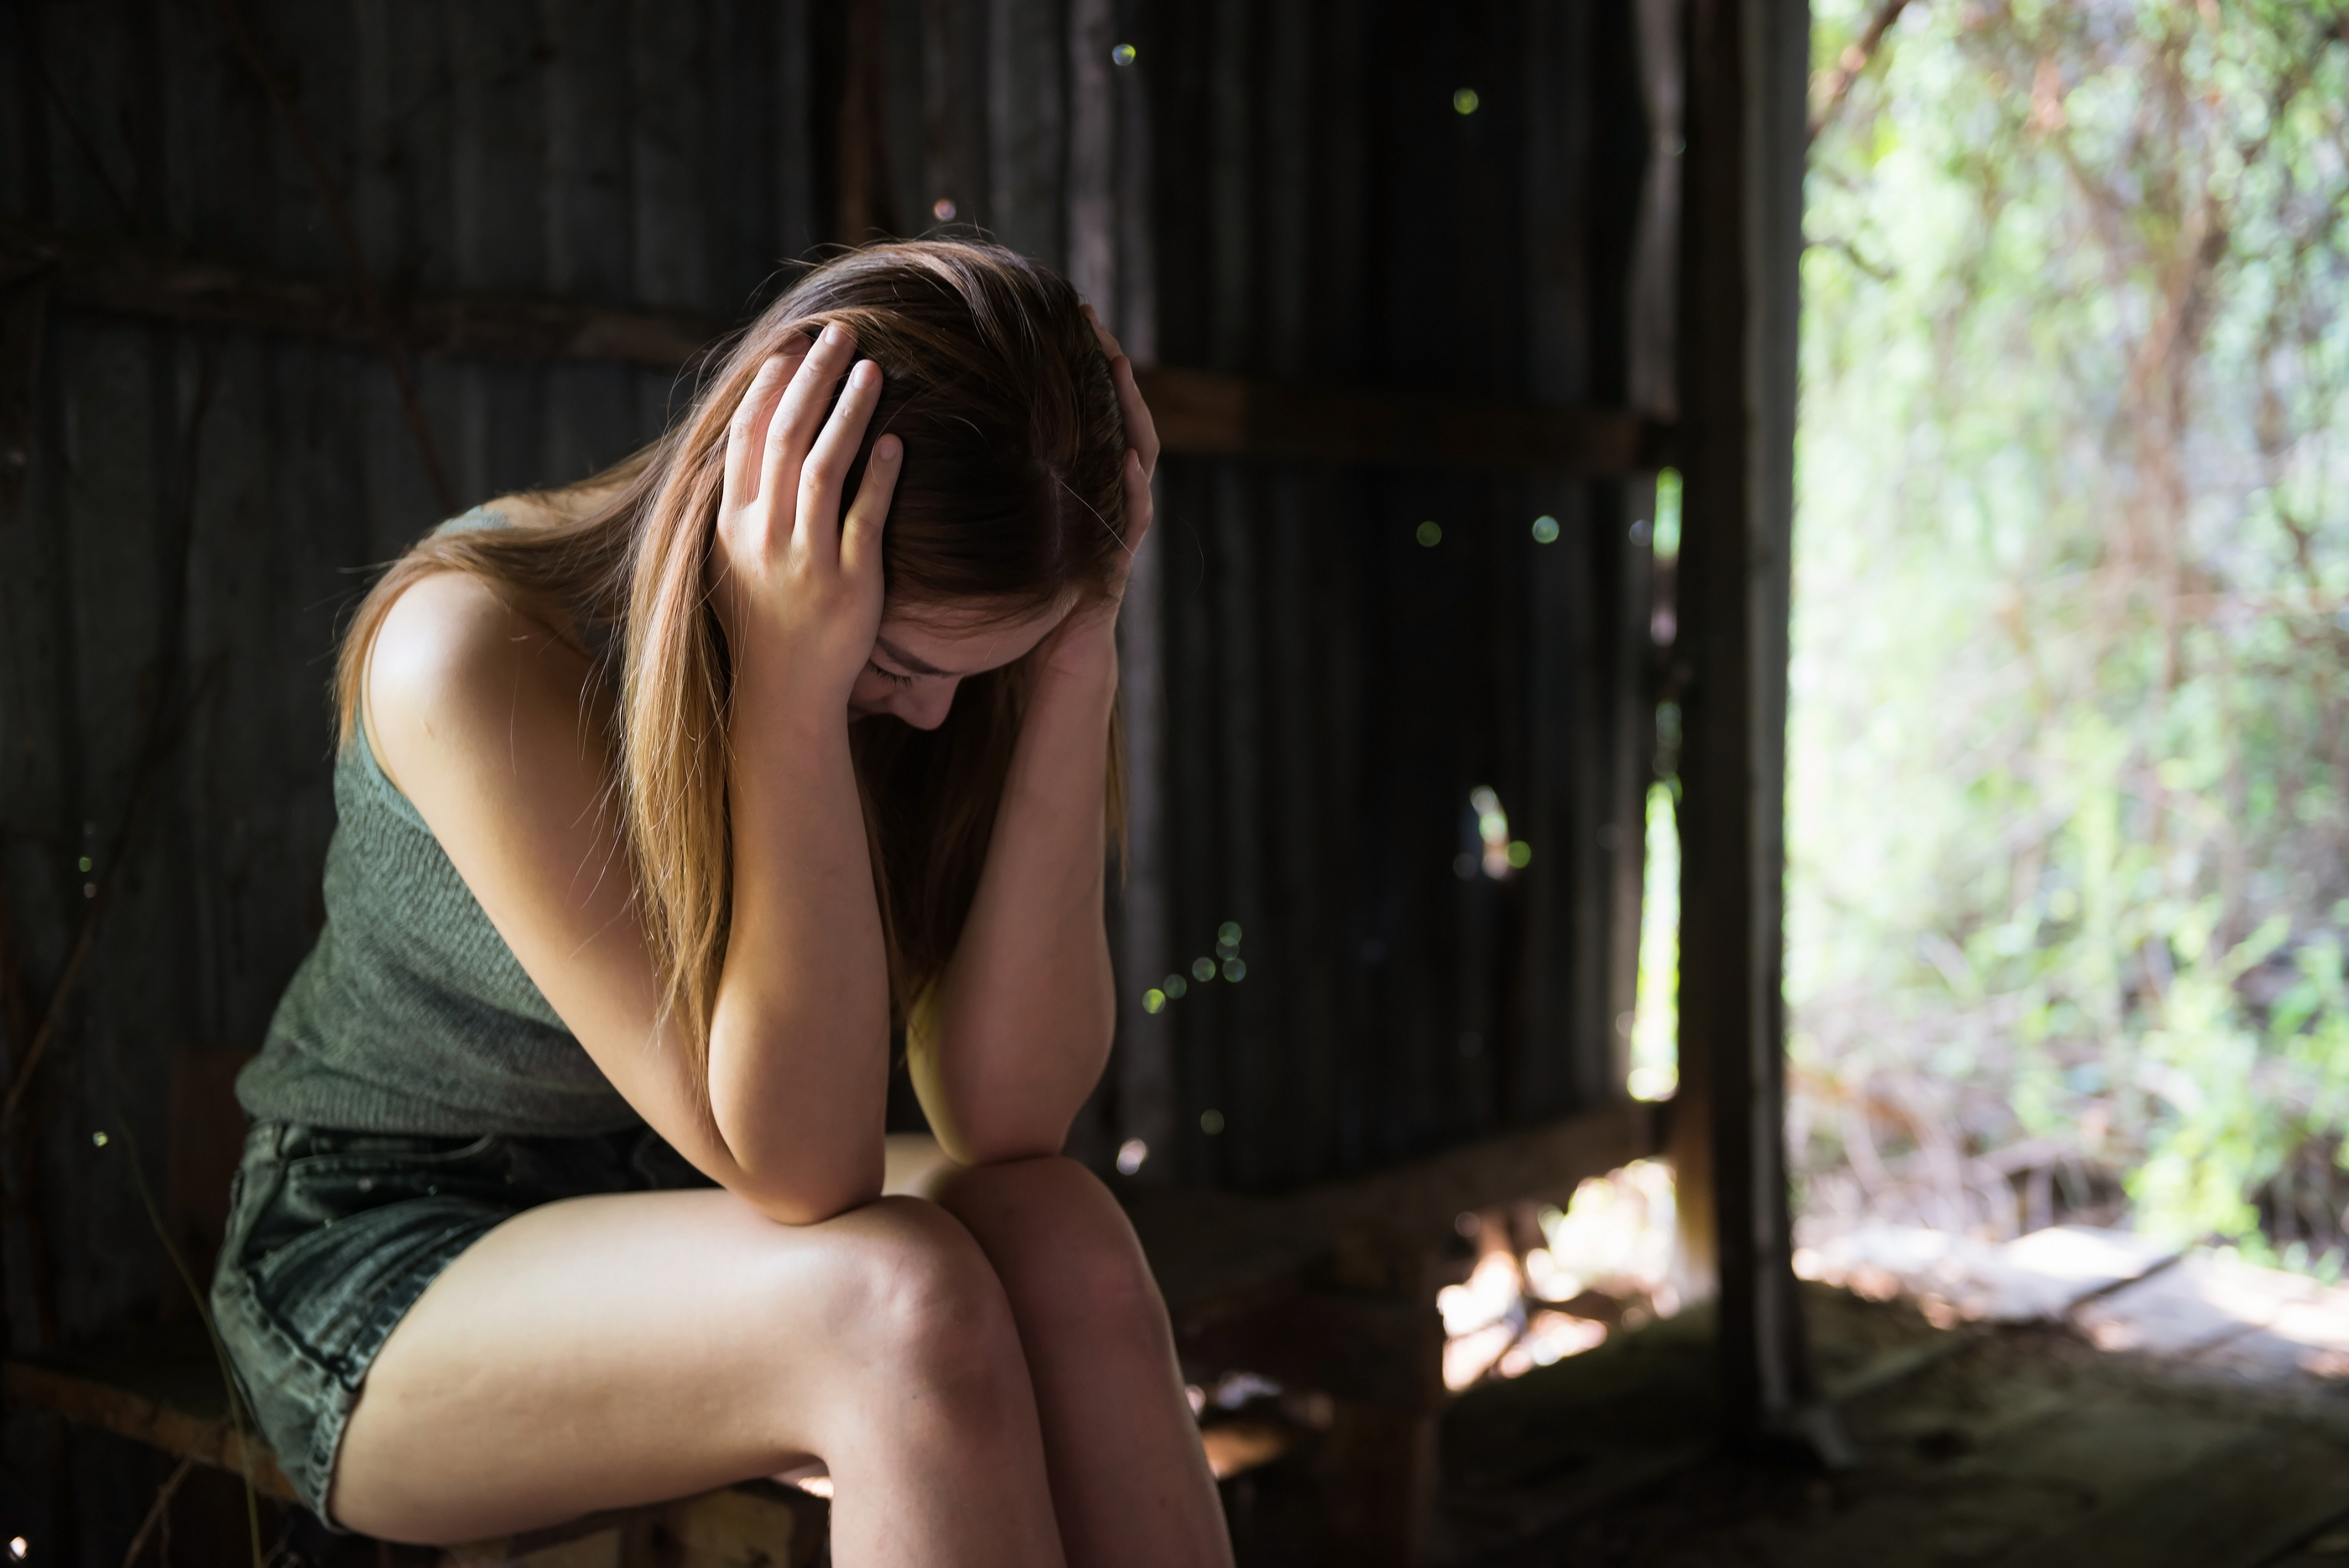 Ignoring Mental Illness Health: Consequences Revealed